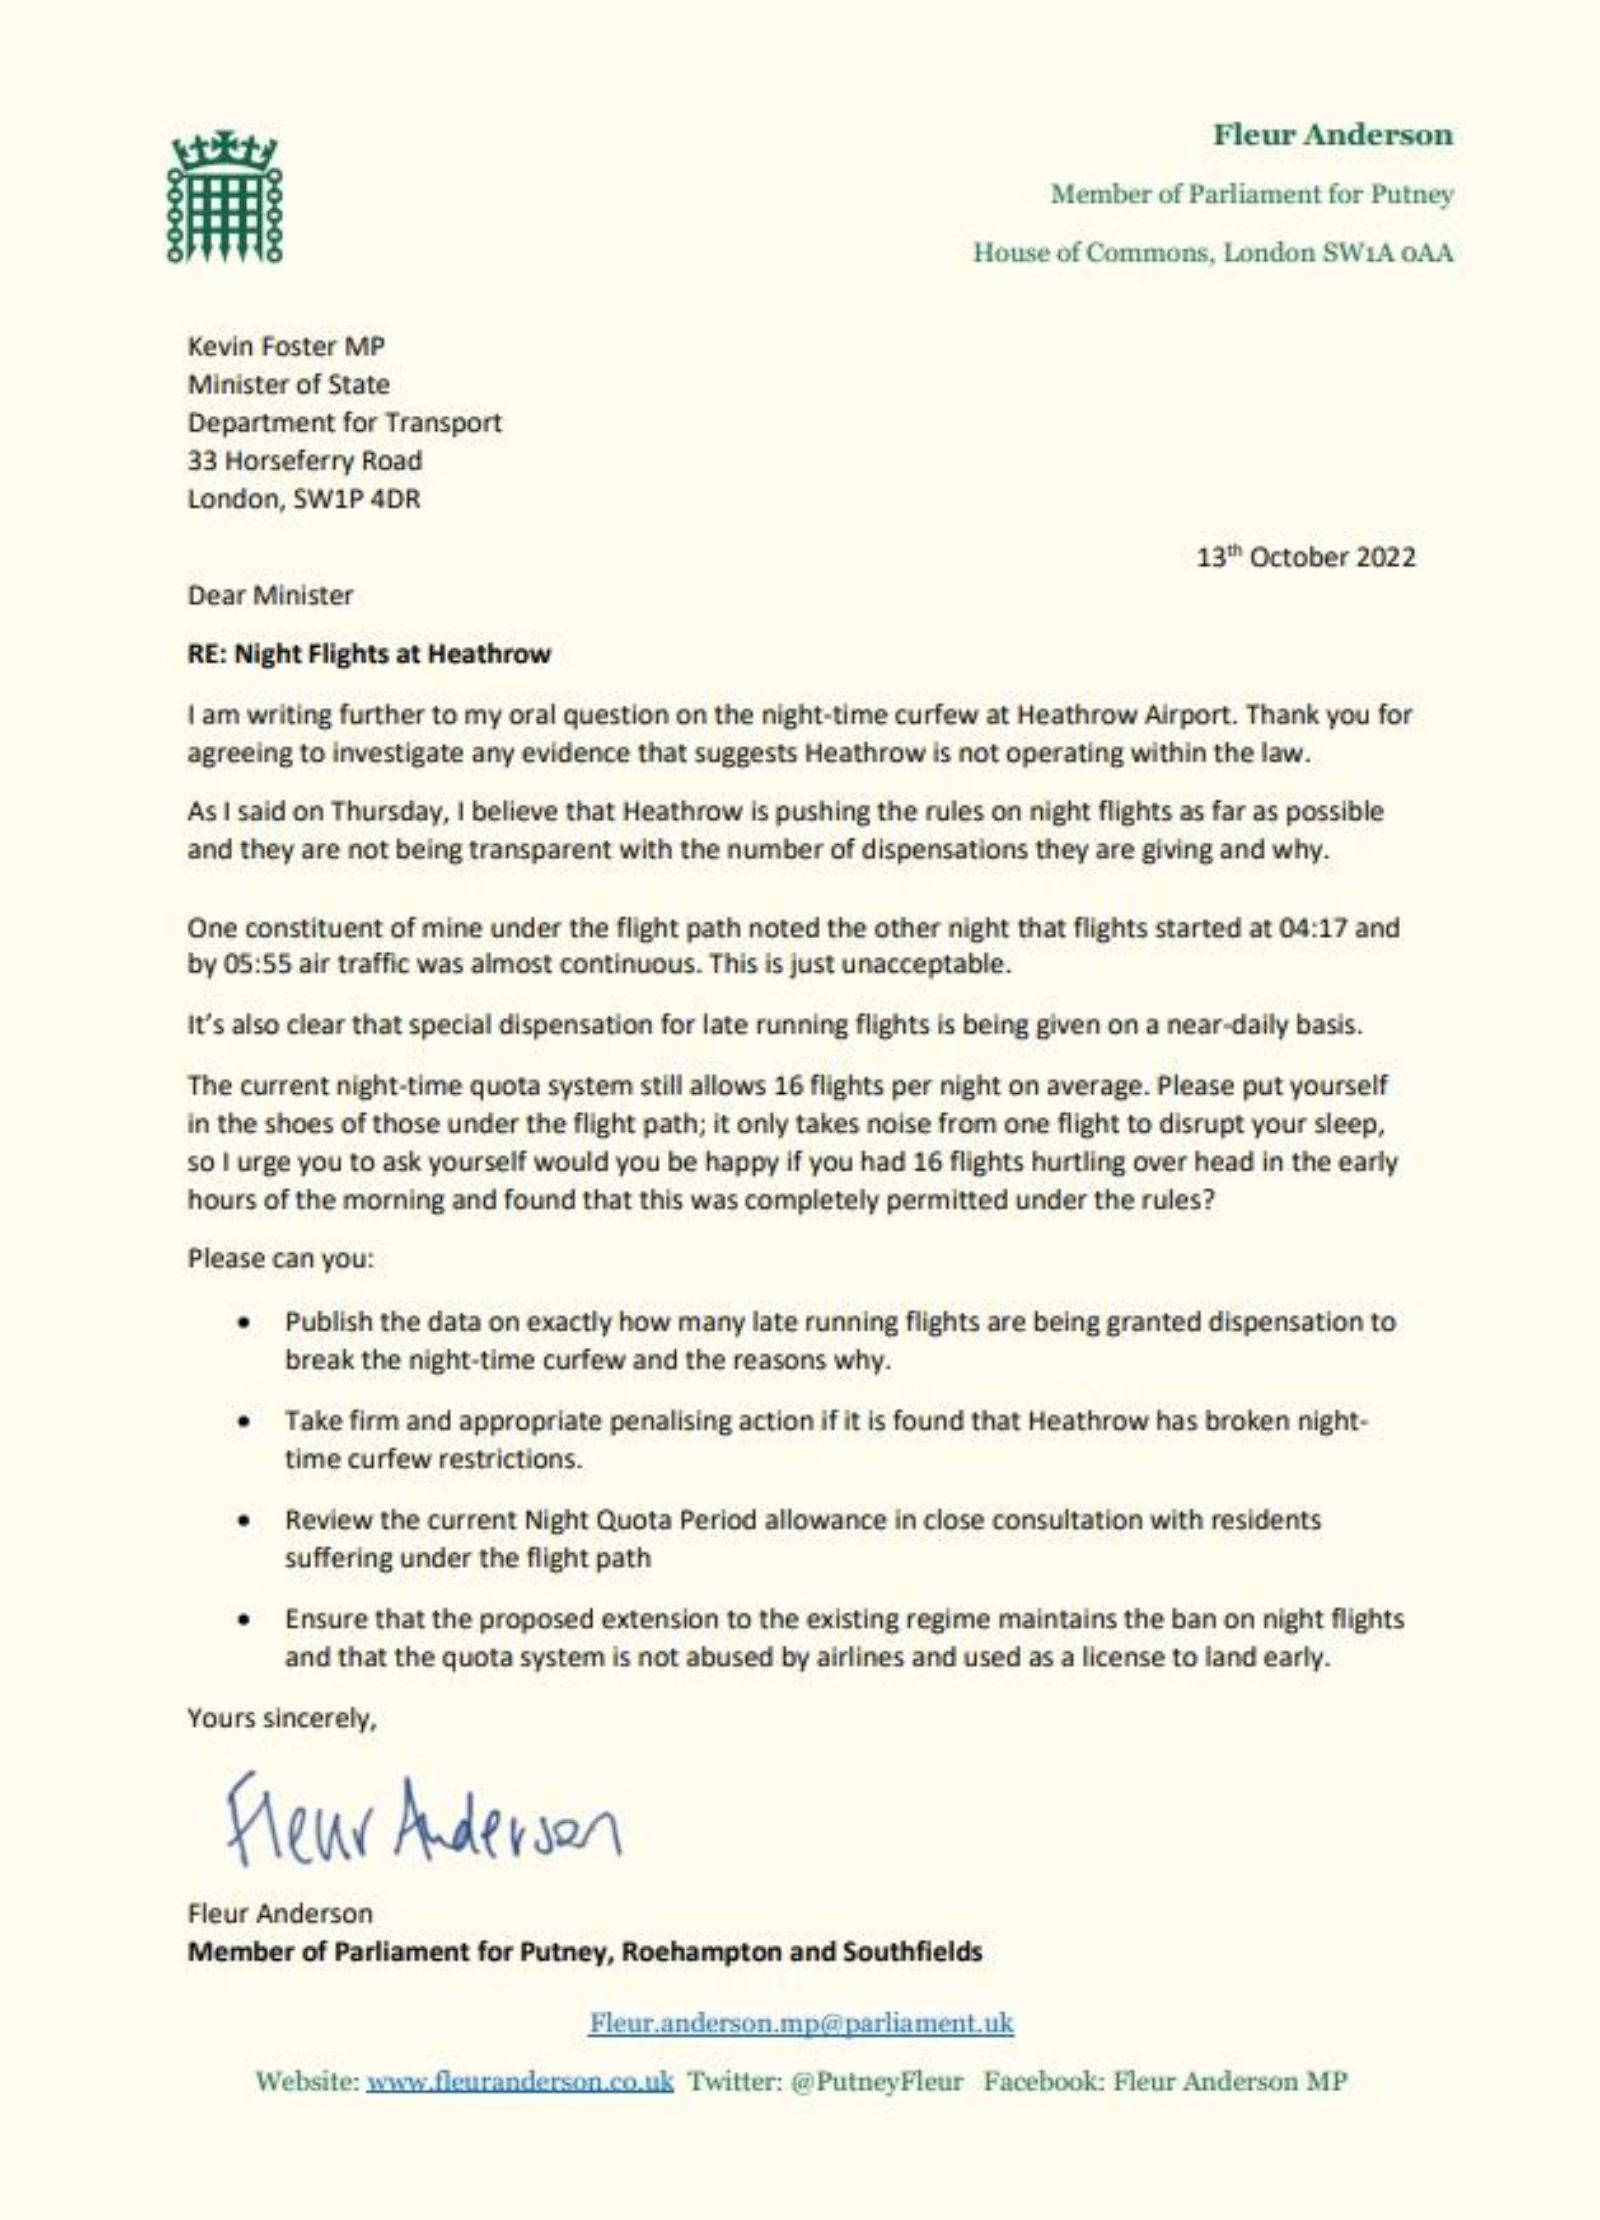 Letter to Minister: Night Flights at Heathrow